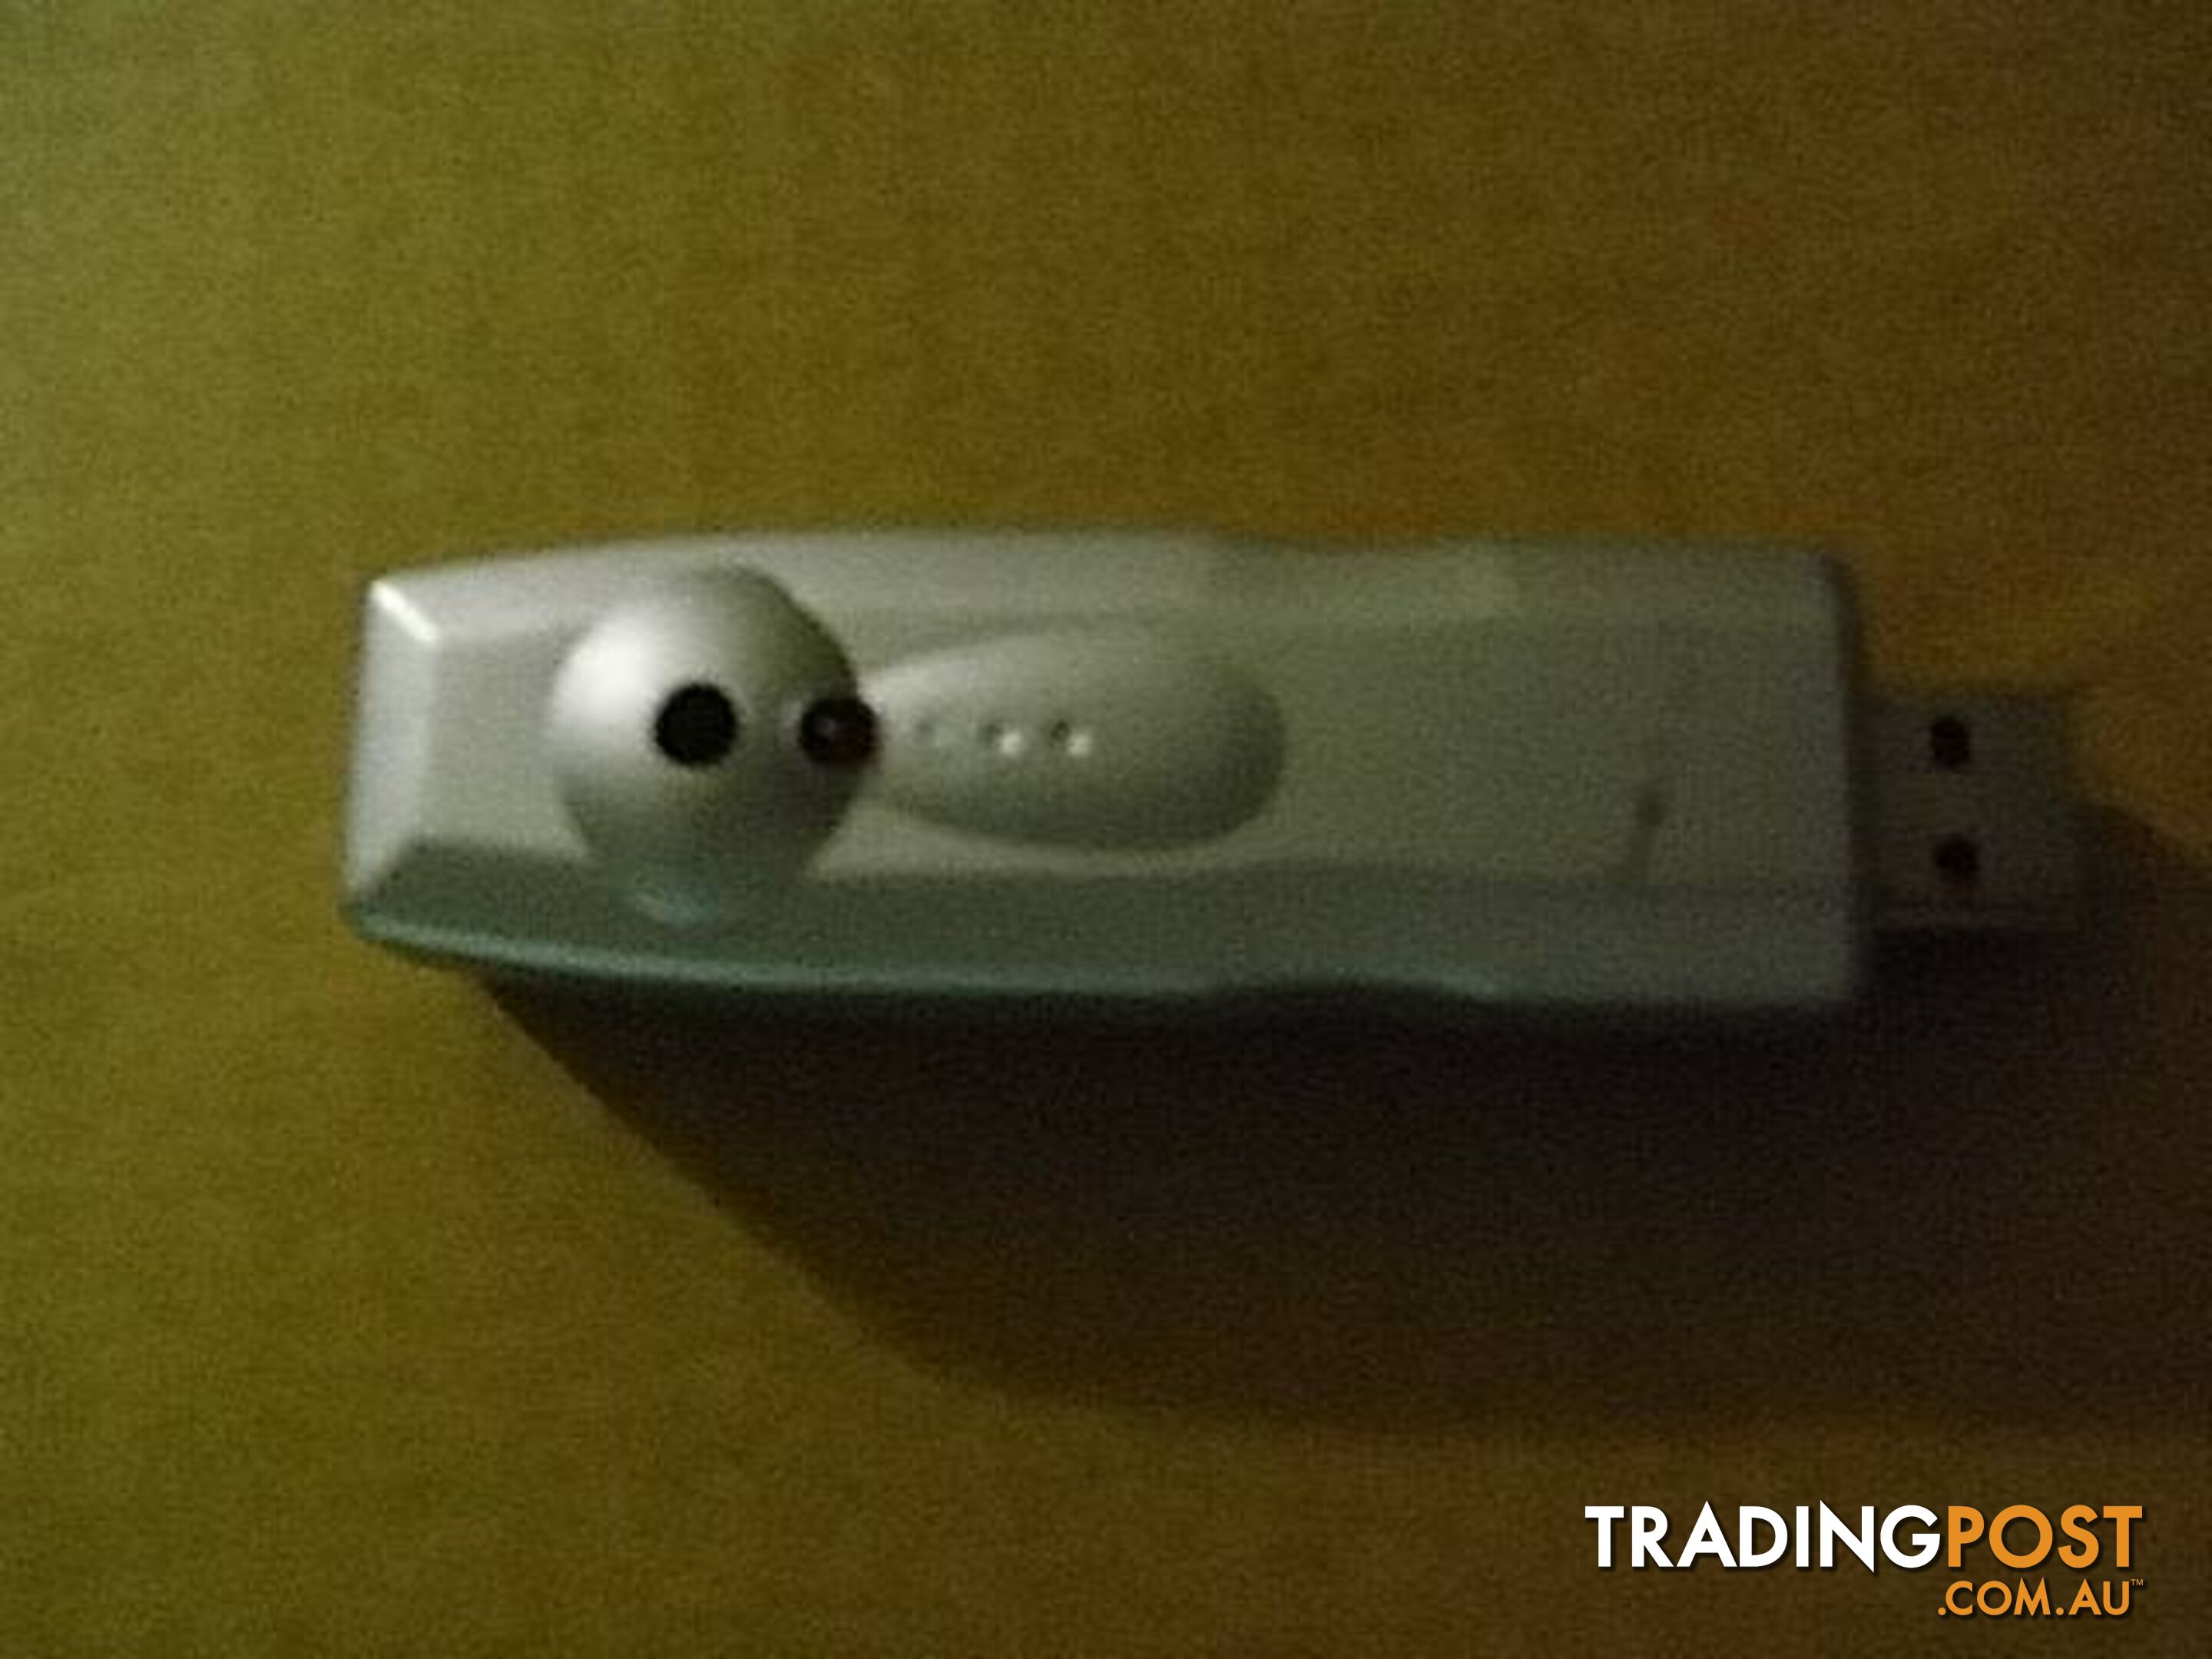 WIFI USB STICK GOOD USED CONDITION